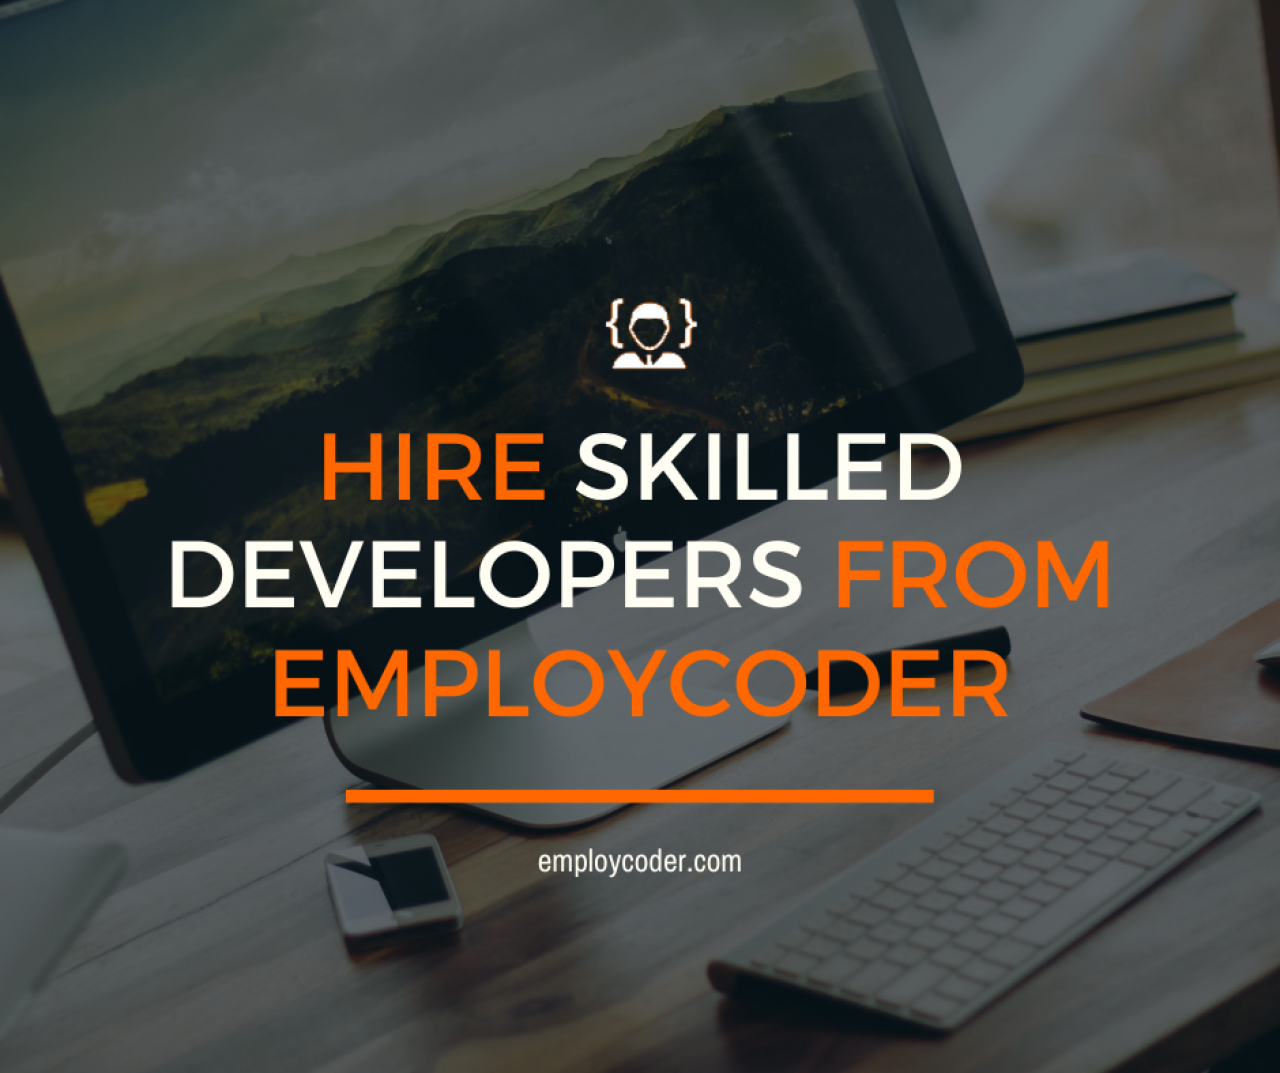 hire-skilled-developers-from-employcoder_large